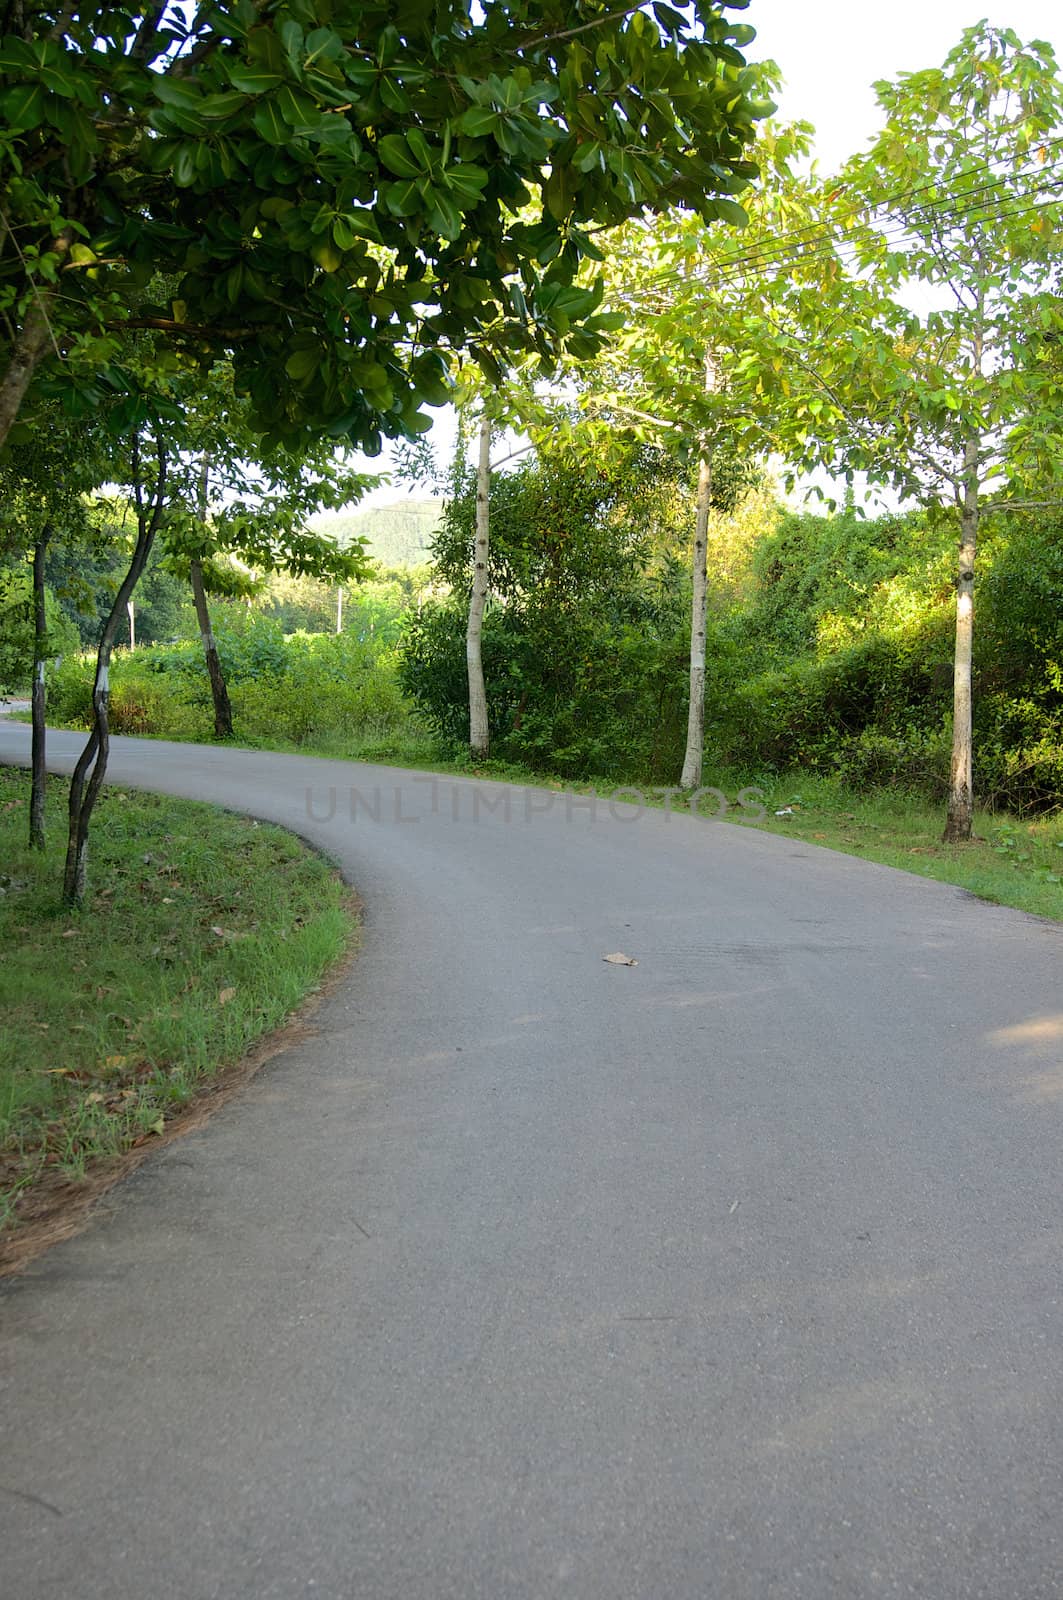 Curve of country asphalt road between green tree in forest.